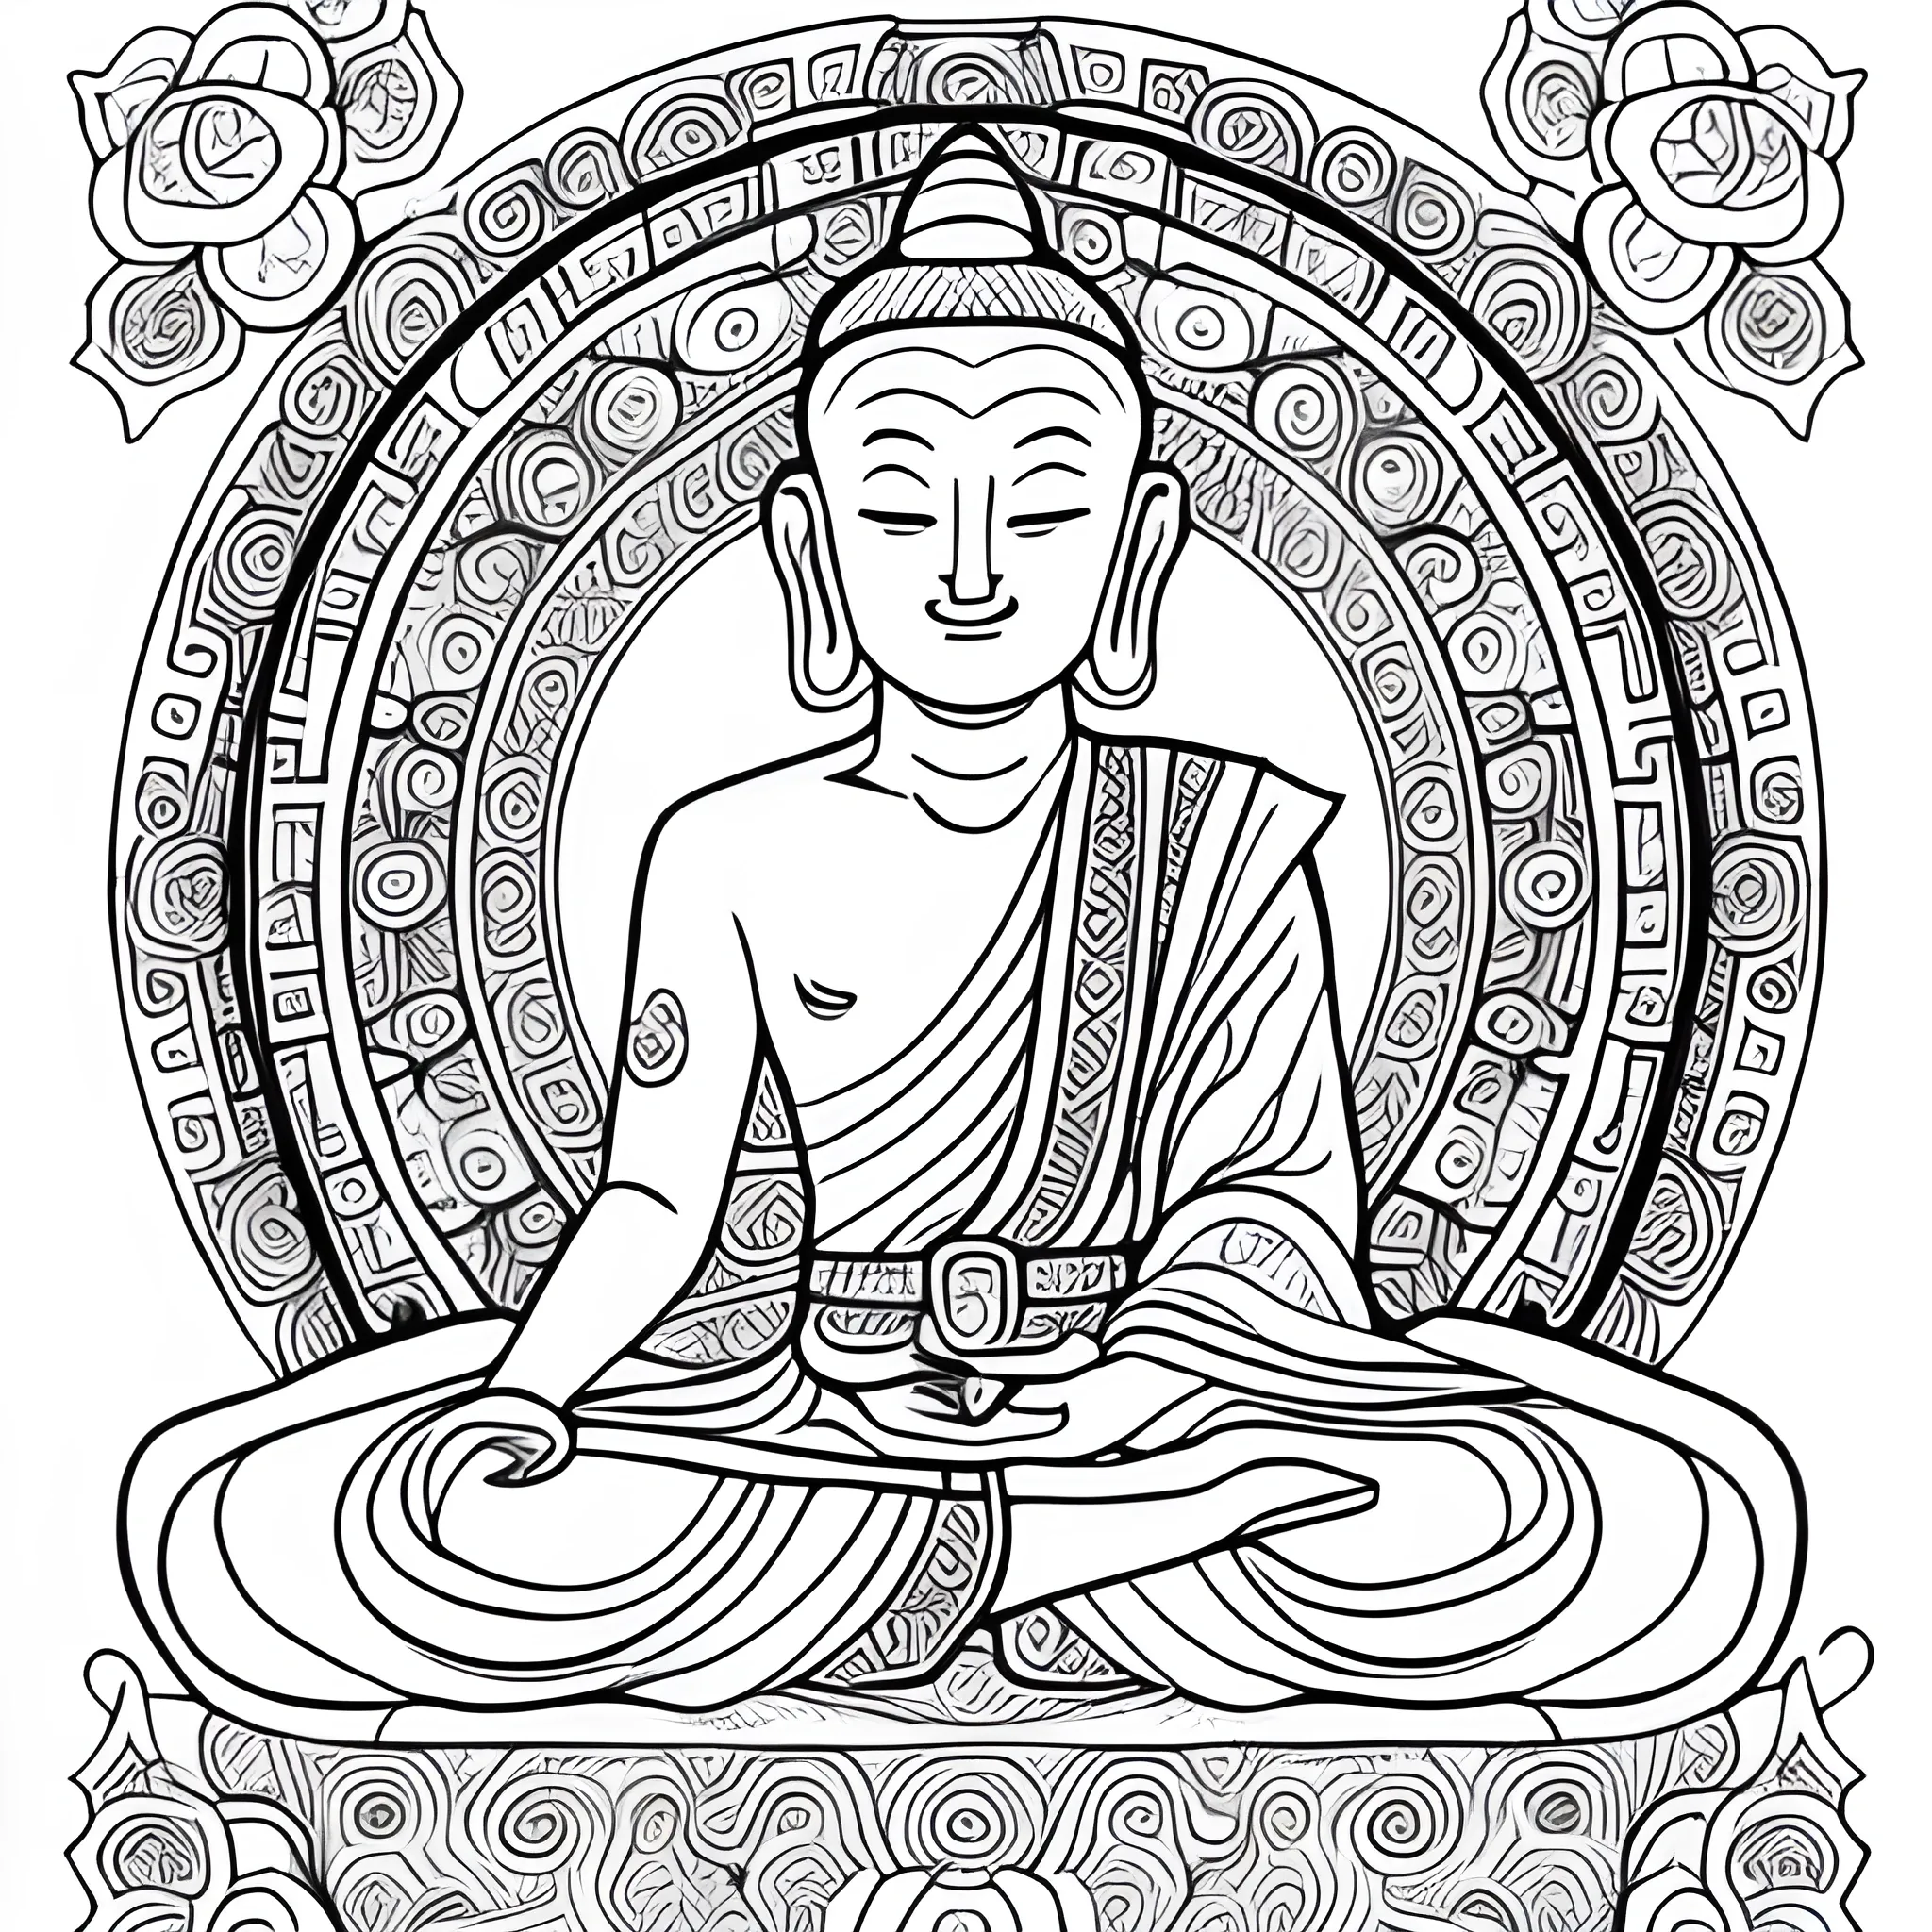 Coloring book page madala buda inspired in the asian culture